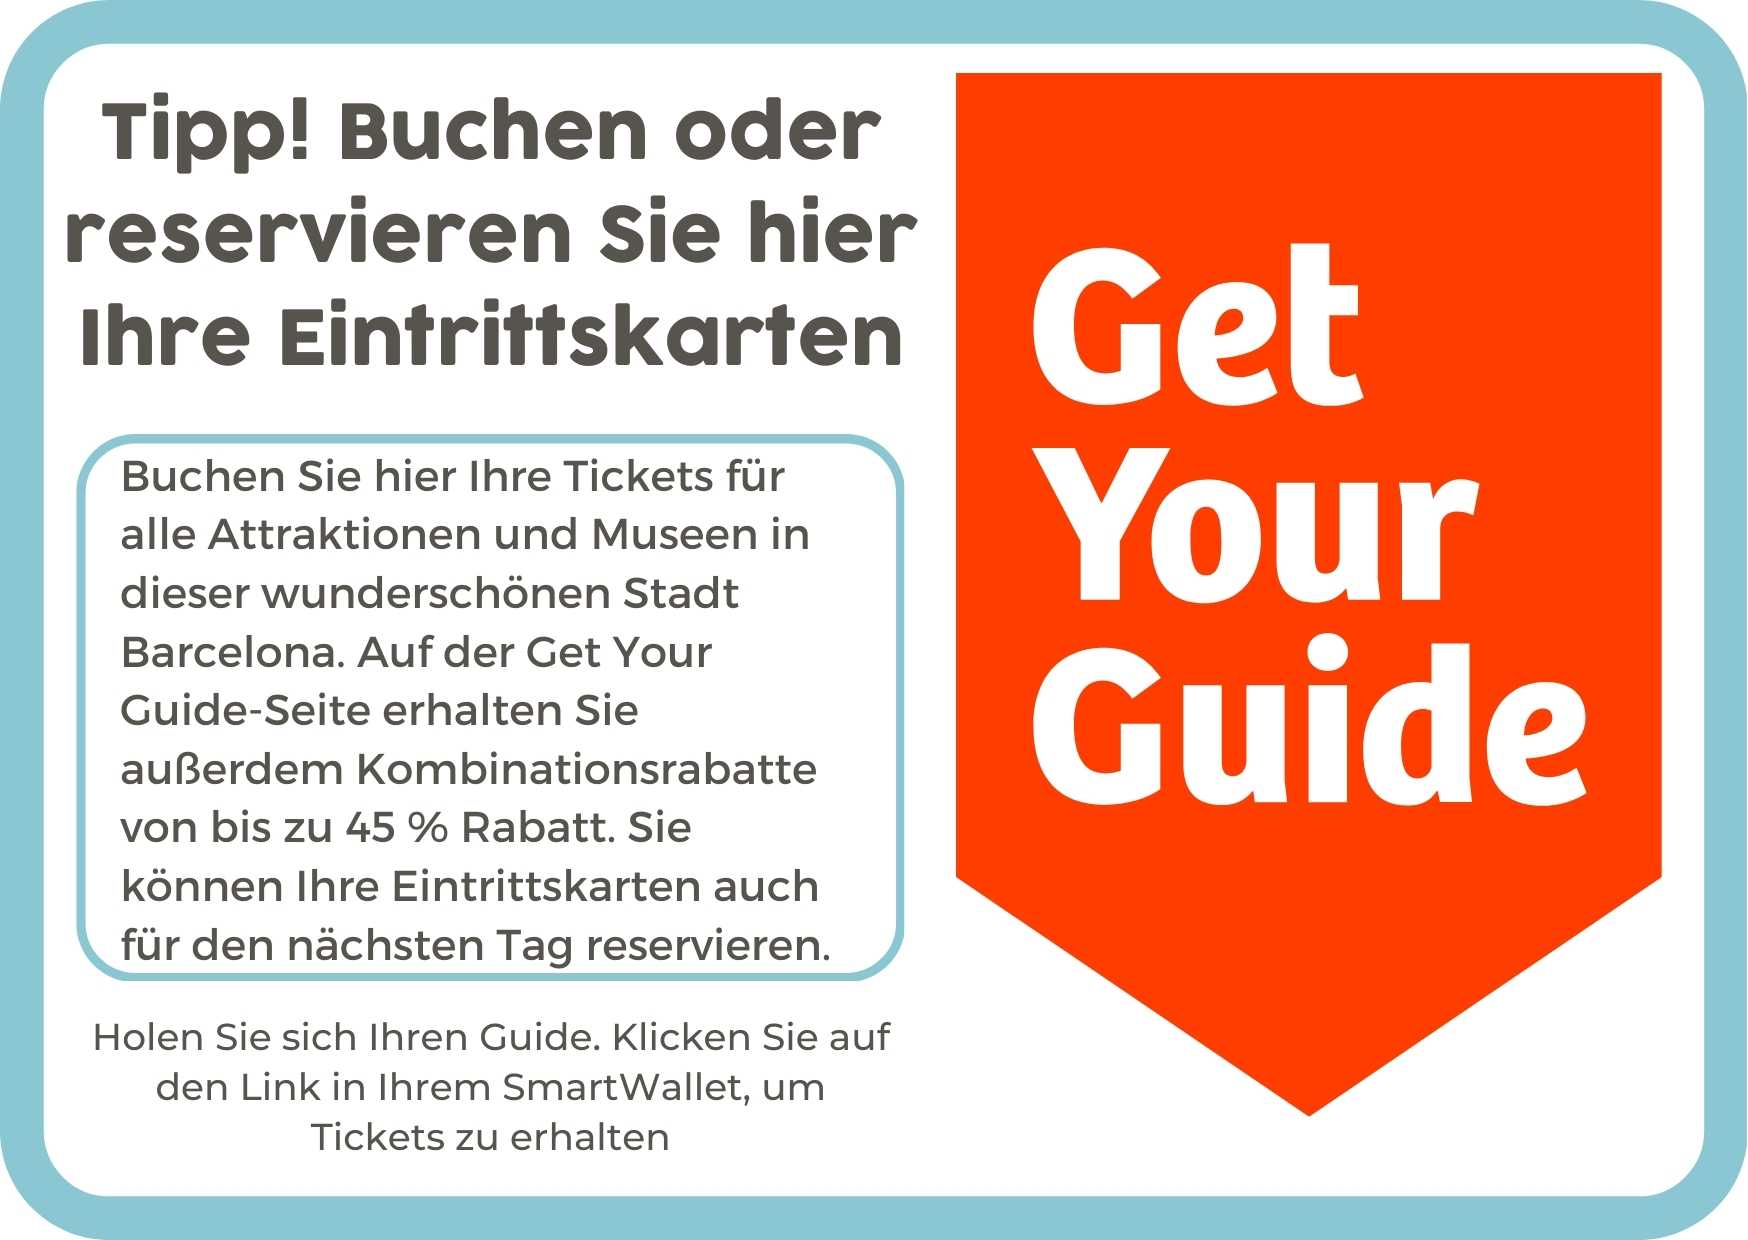 13. (Duits) Get Your Guide